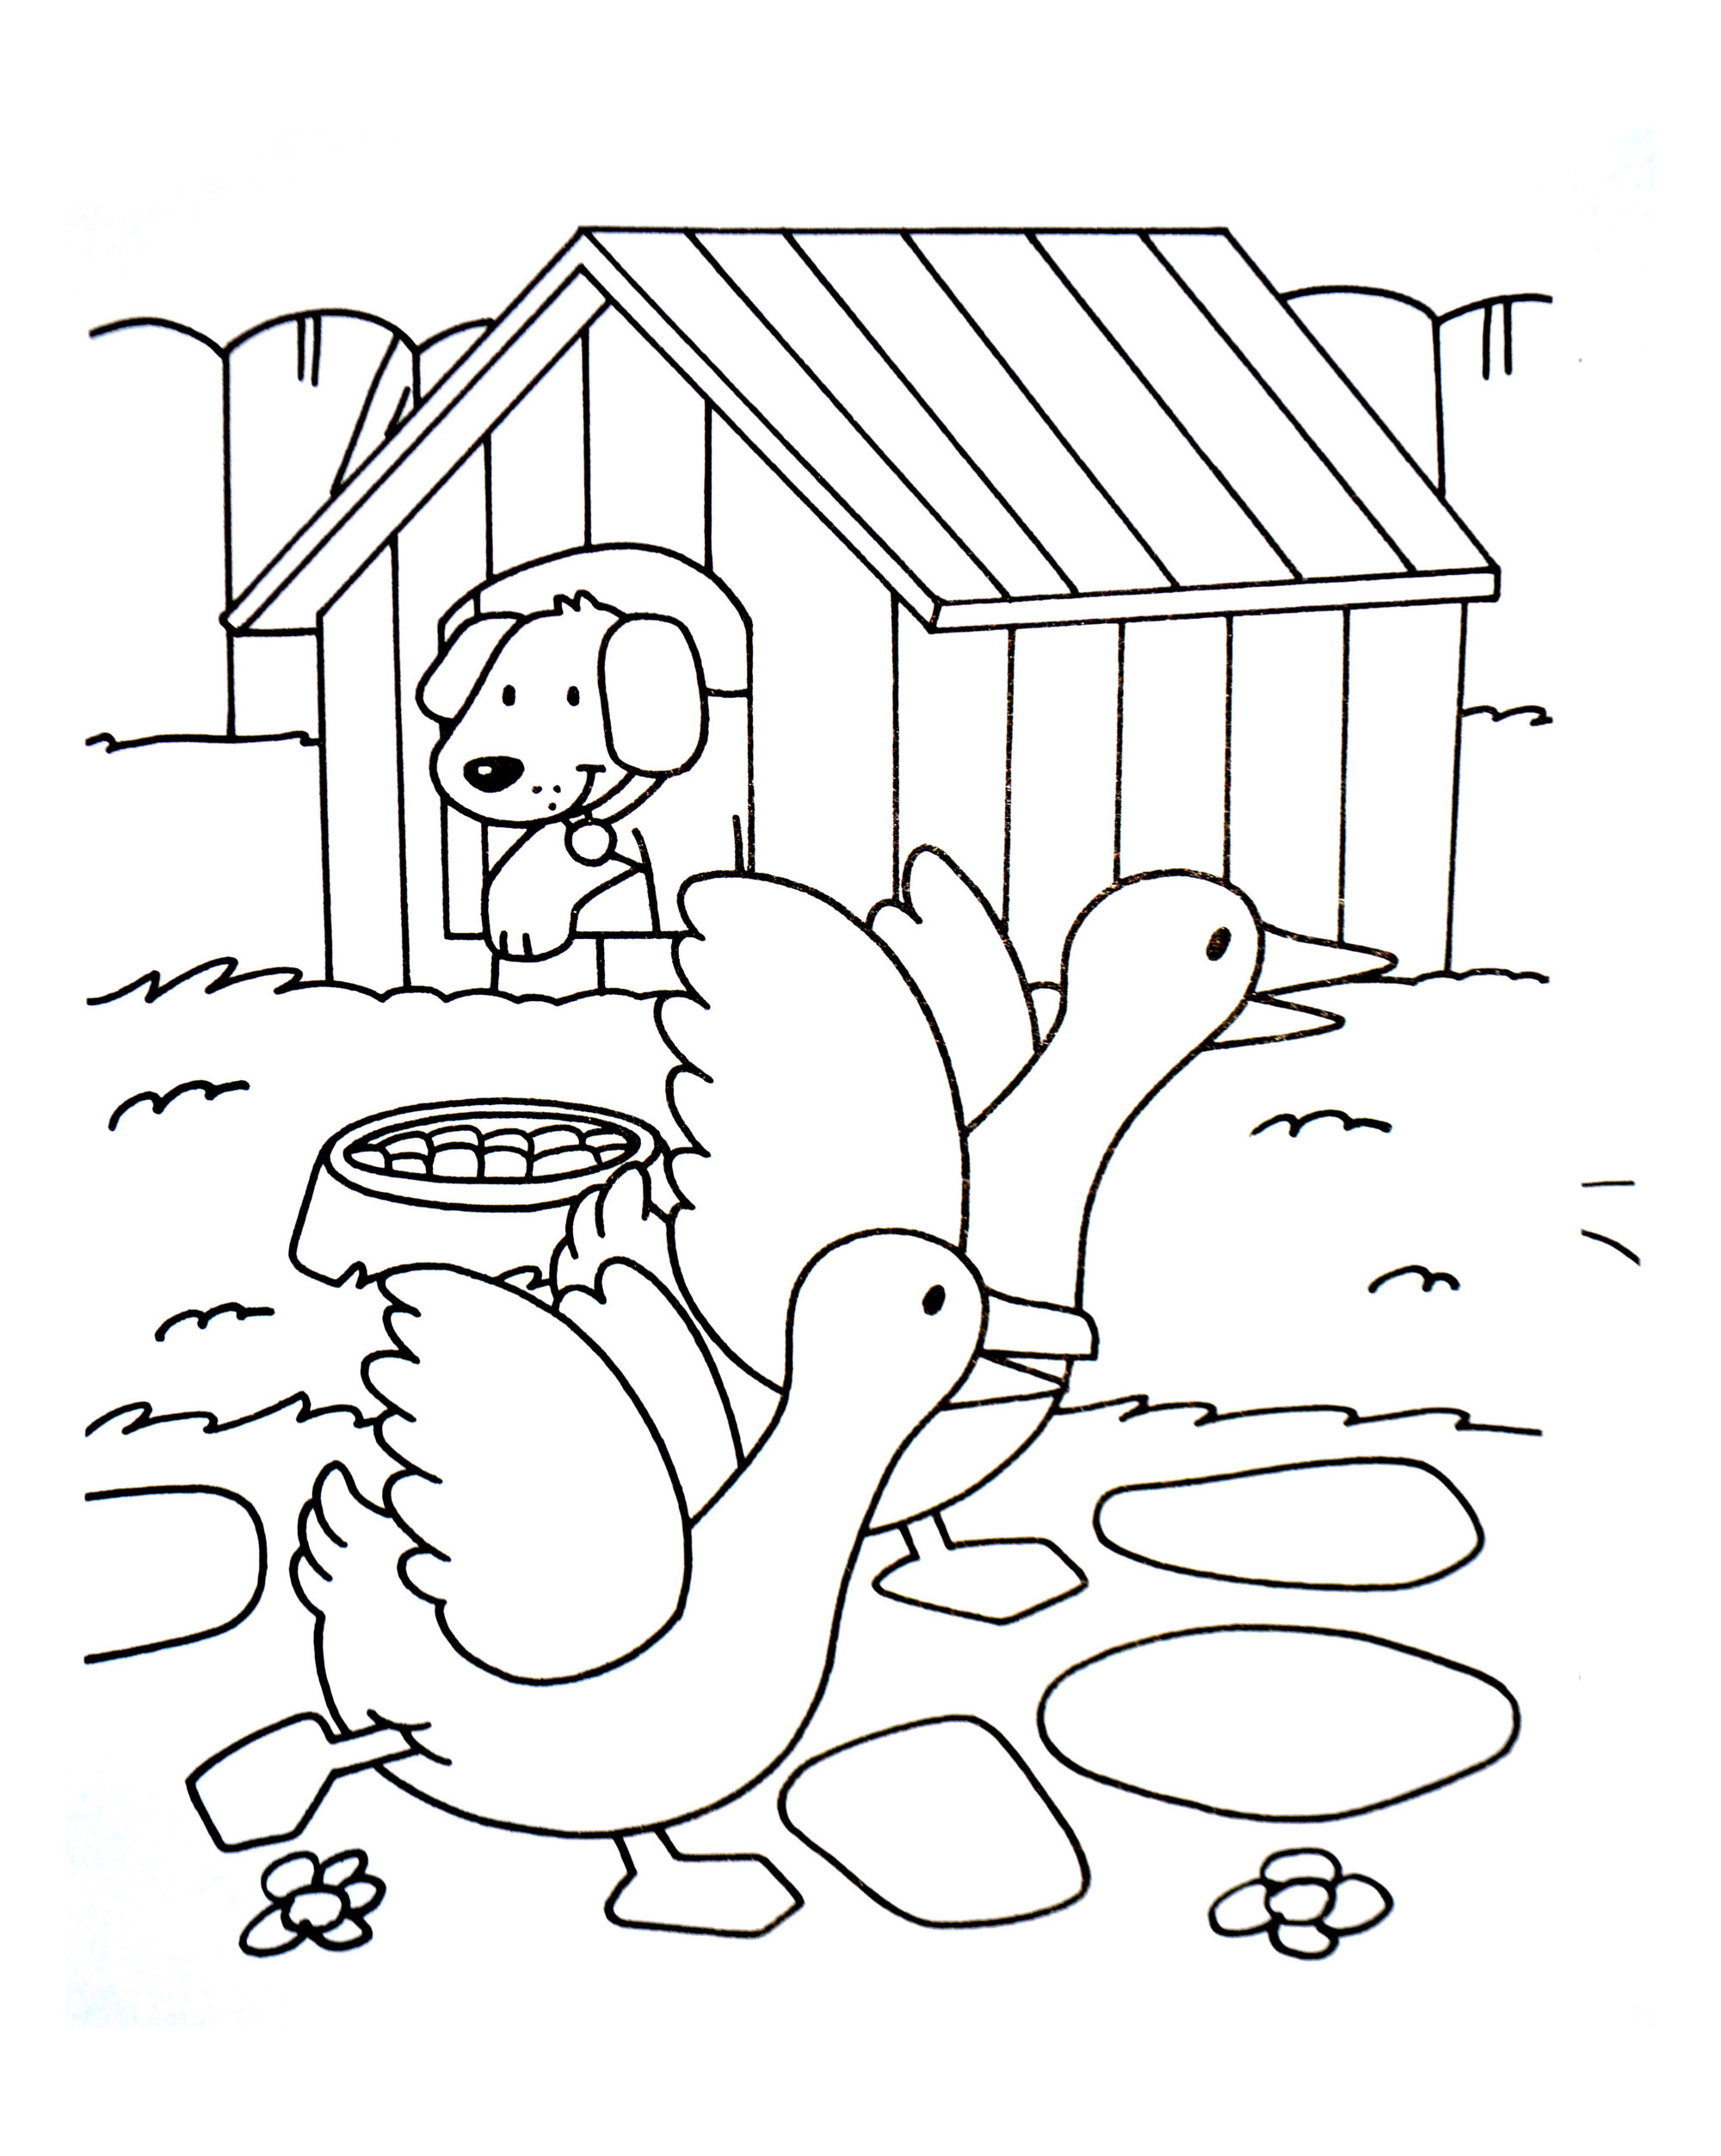 Kids Farm Coloring Pages Farm Free To Color For Children Farm Kids Coloring Pages